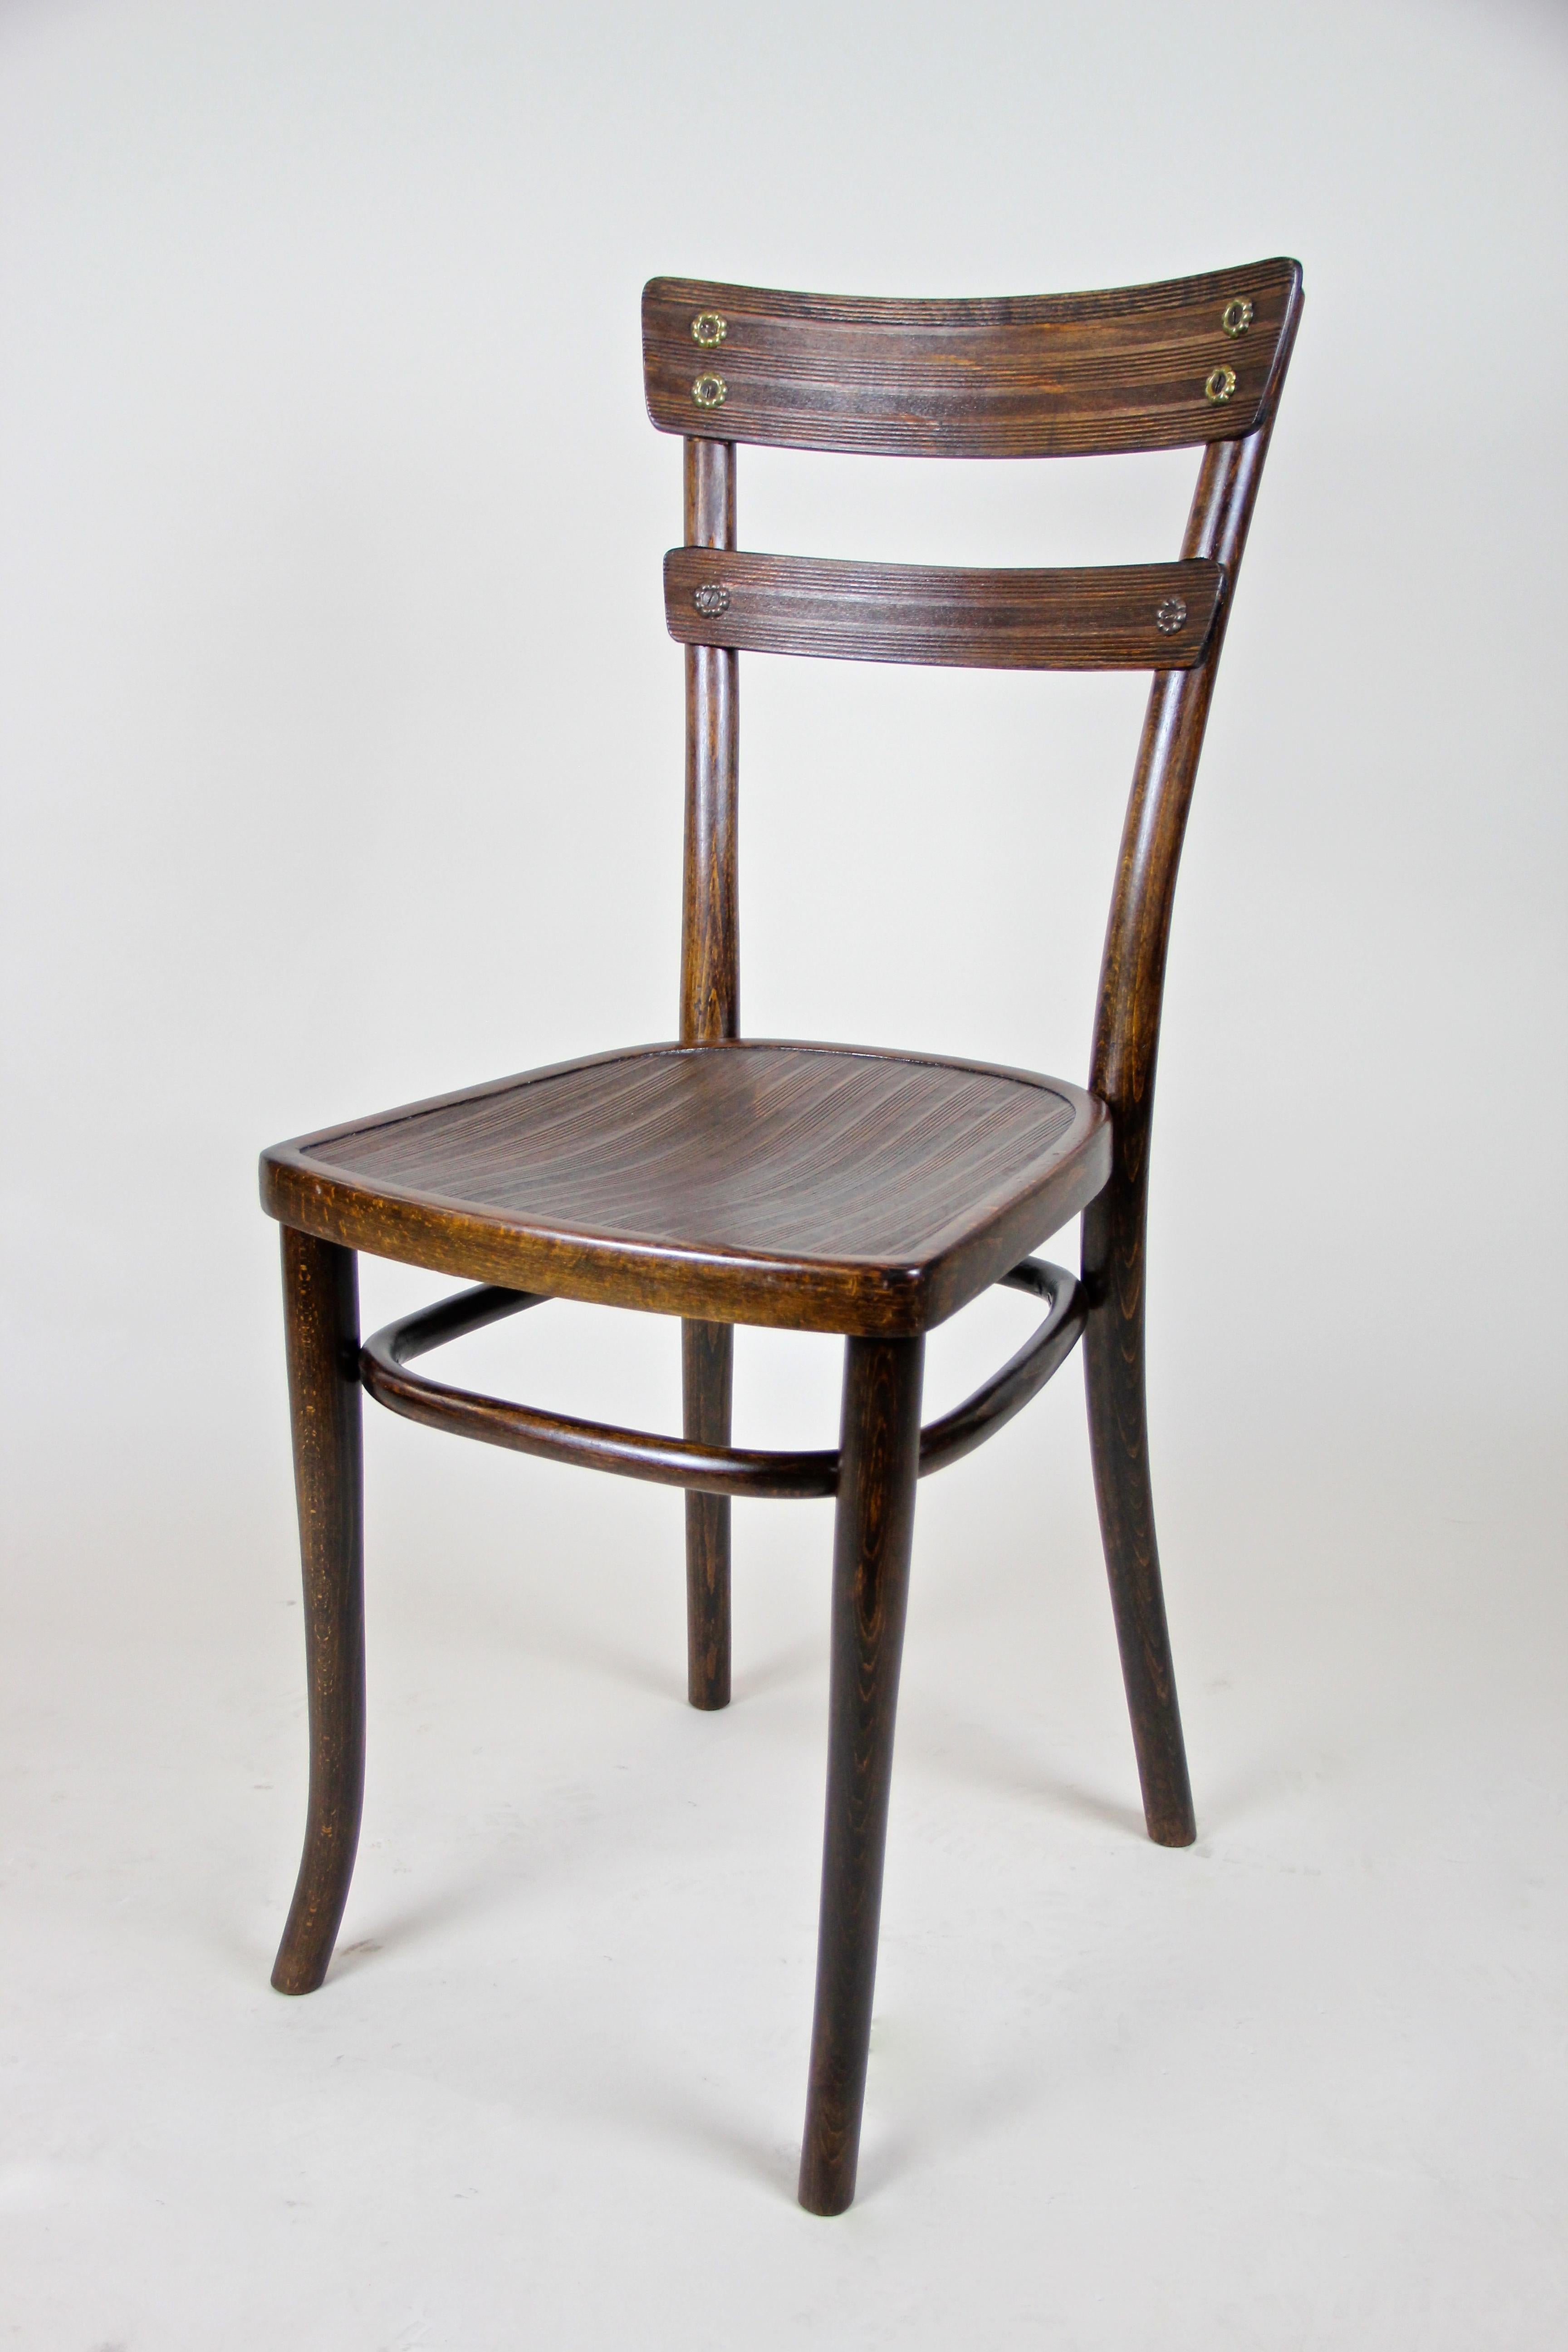 Lovely set of three Art Nouveau Thonet Chairs from the turn of the 20th century in Austria. These slim, elegant designed bentwood chairs were produced in Vienna by the famous company of Thonet circa 1905 and show very nice details like the unusual